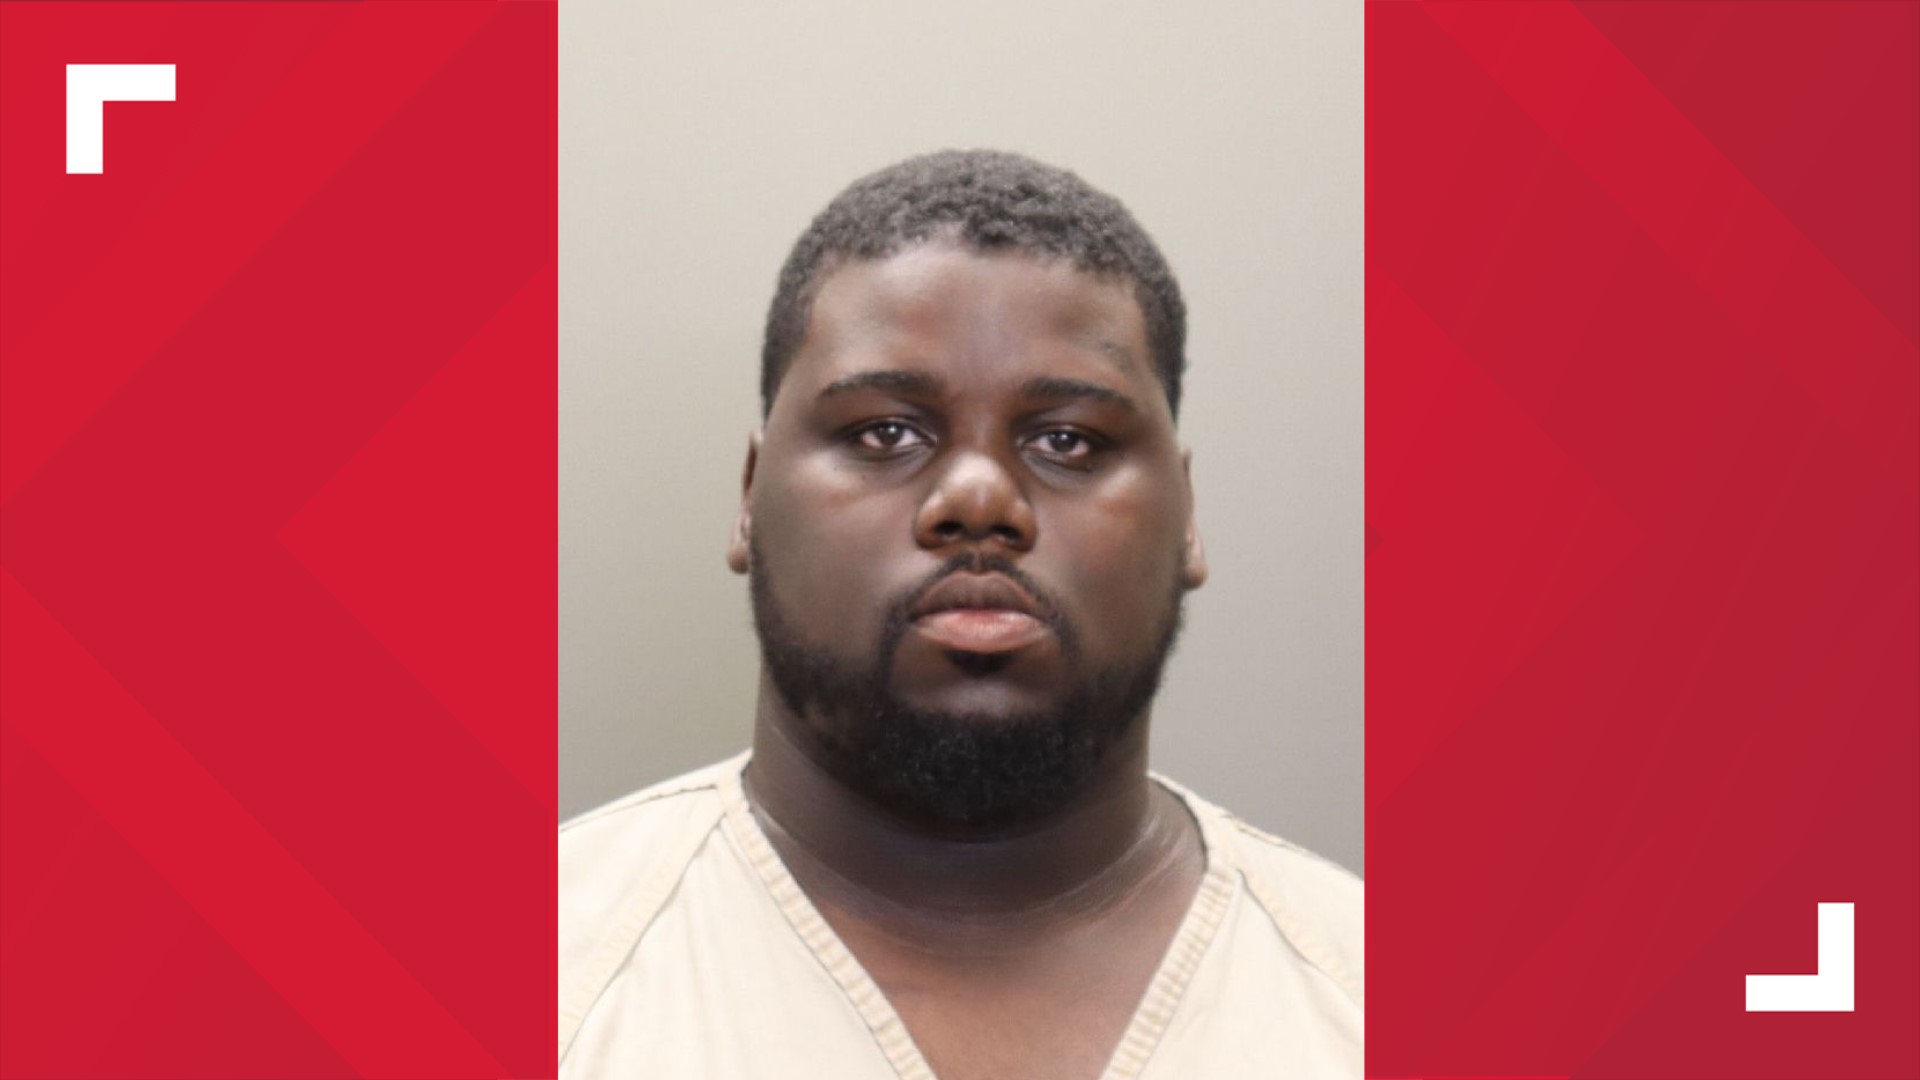 Tyrone Gray Jr., 24, is charged with the shooting death of 25-year-old Dontarious Sylvester inside Sole Stop on June 12.